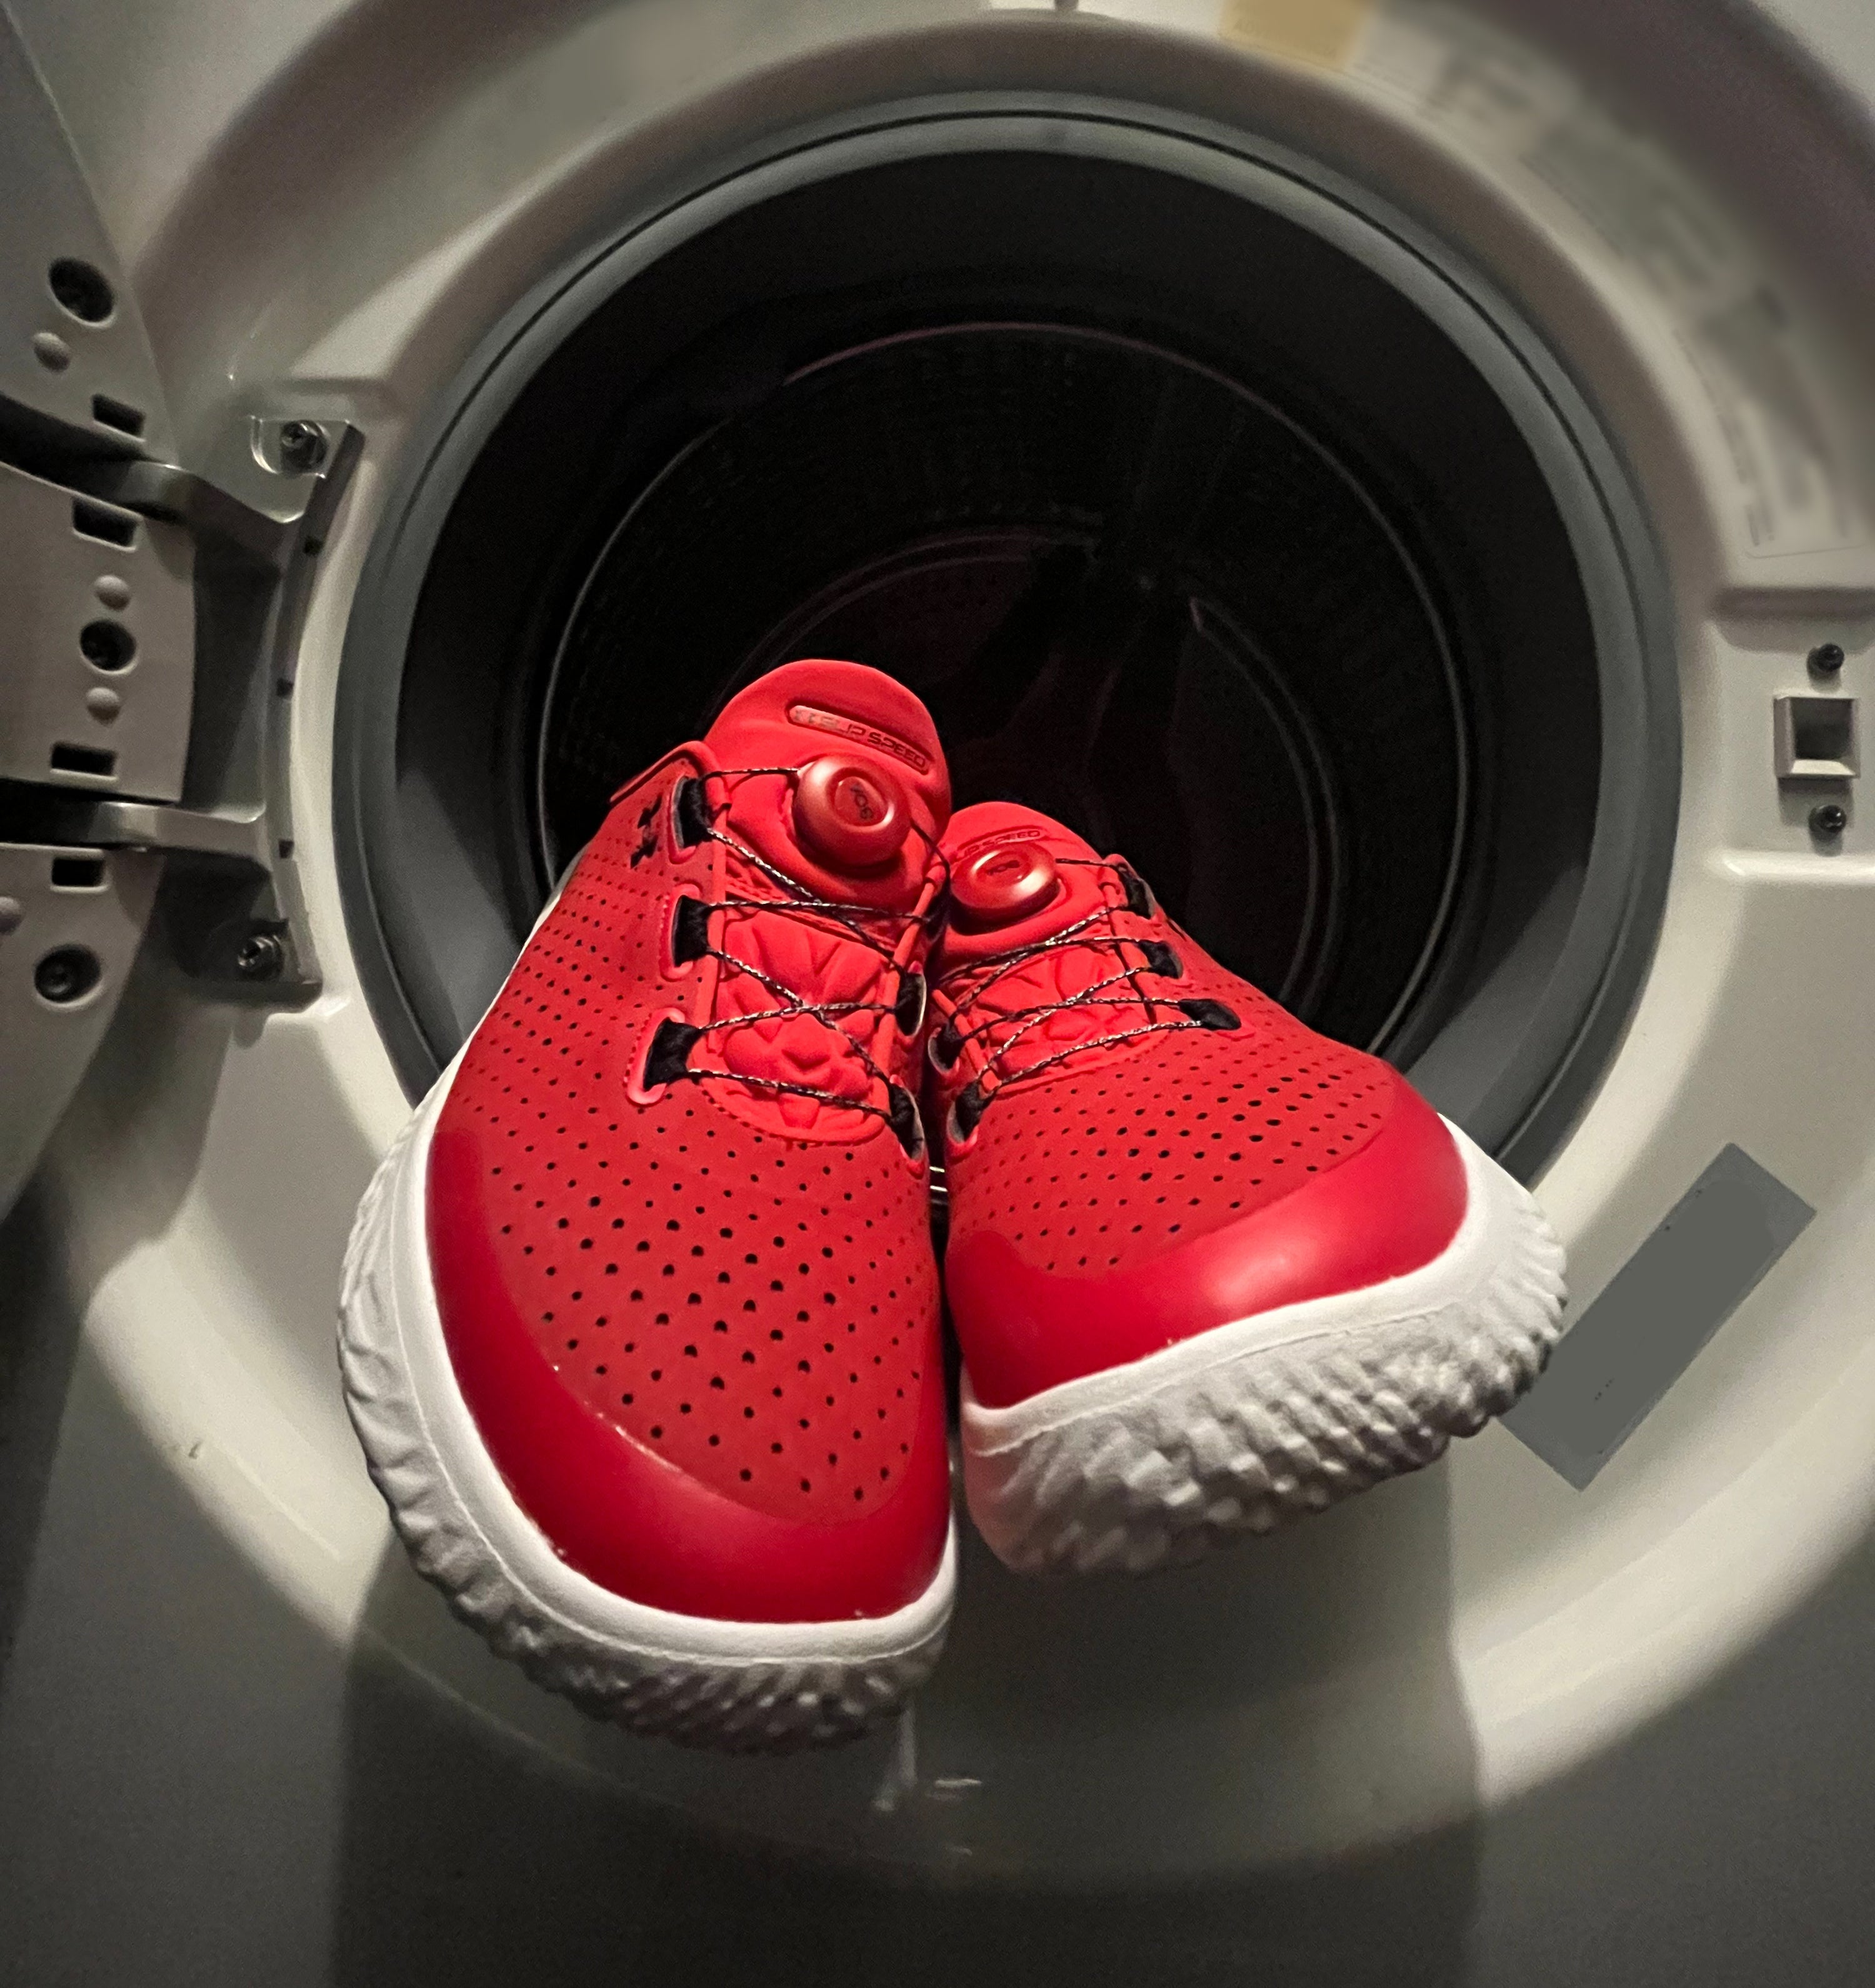 the shoes on the opening of the washing machine